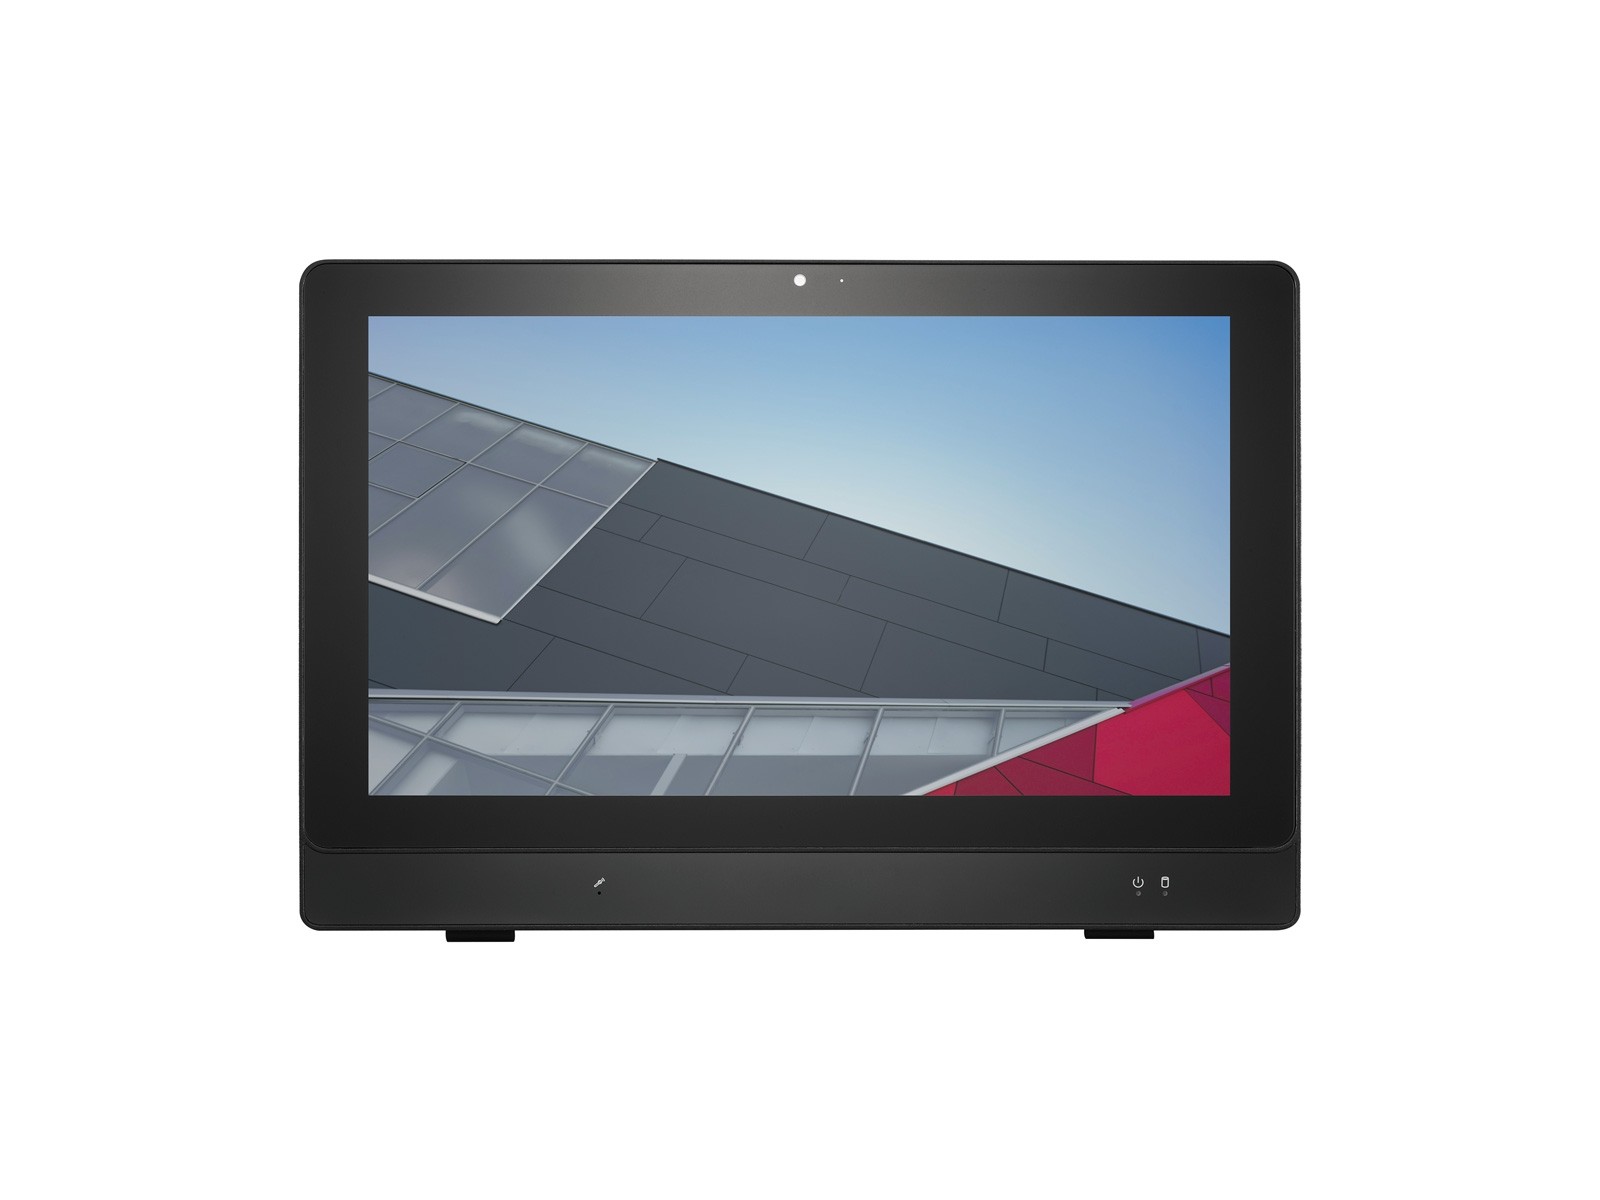 Shuttle P2500T- Compact All-in-One PC for POS and control applications